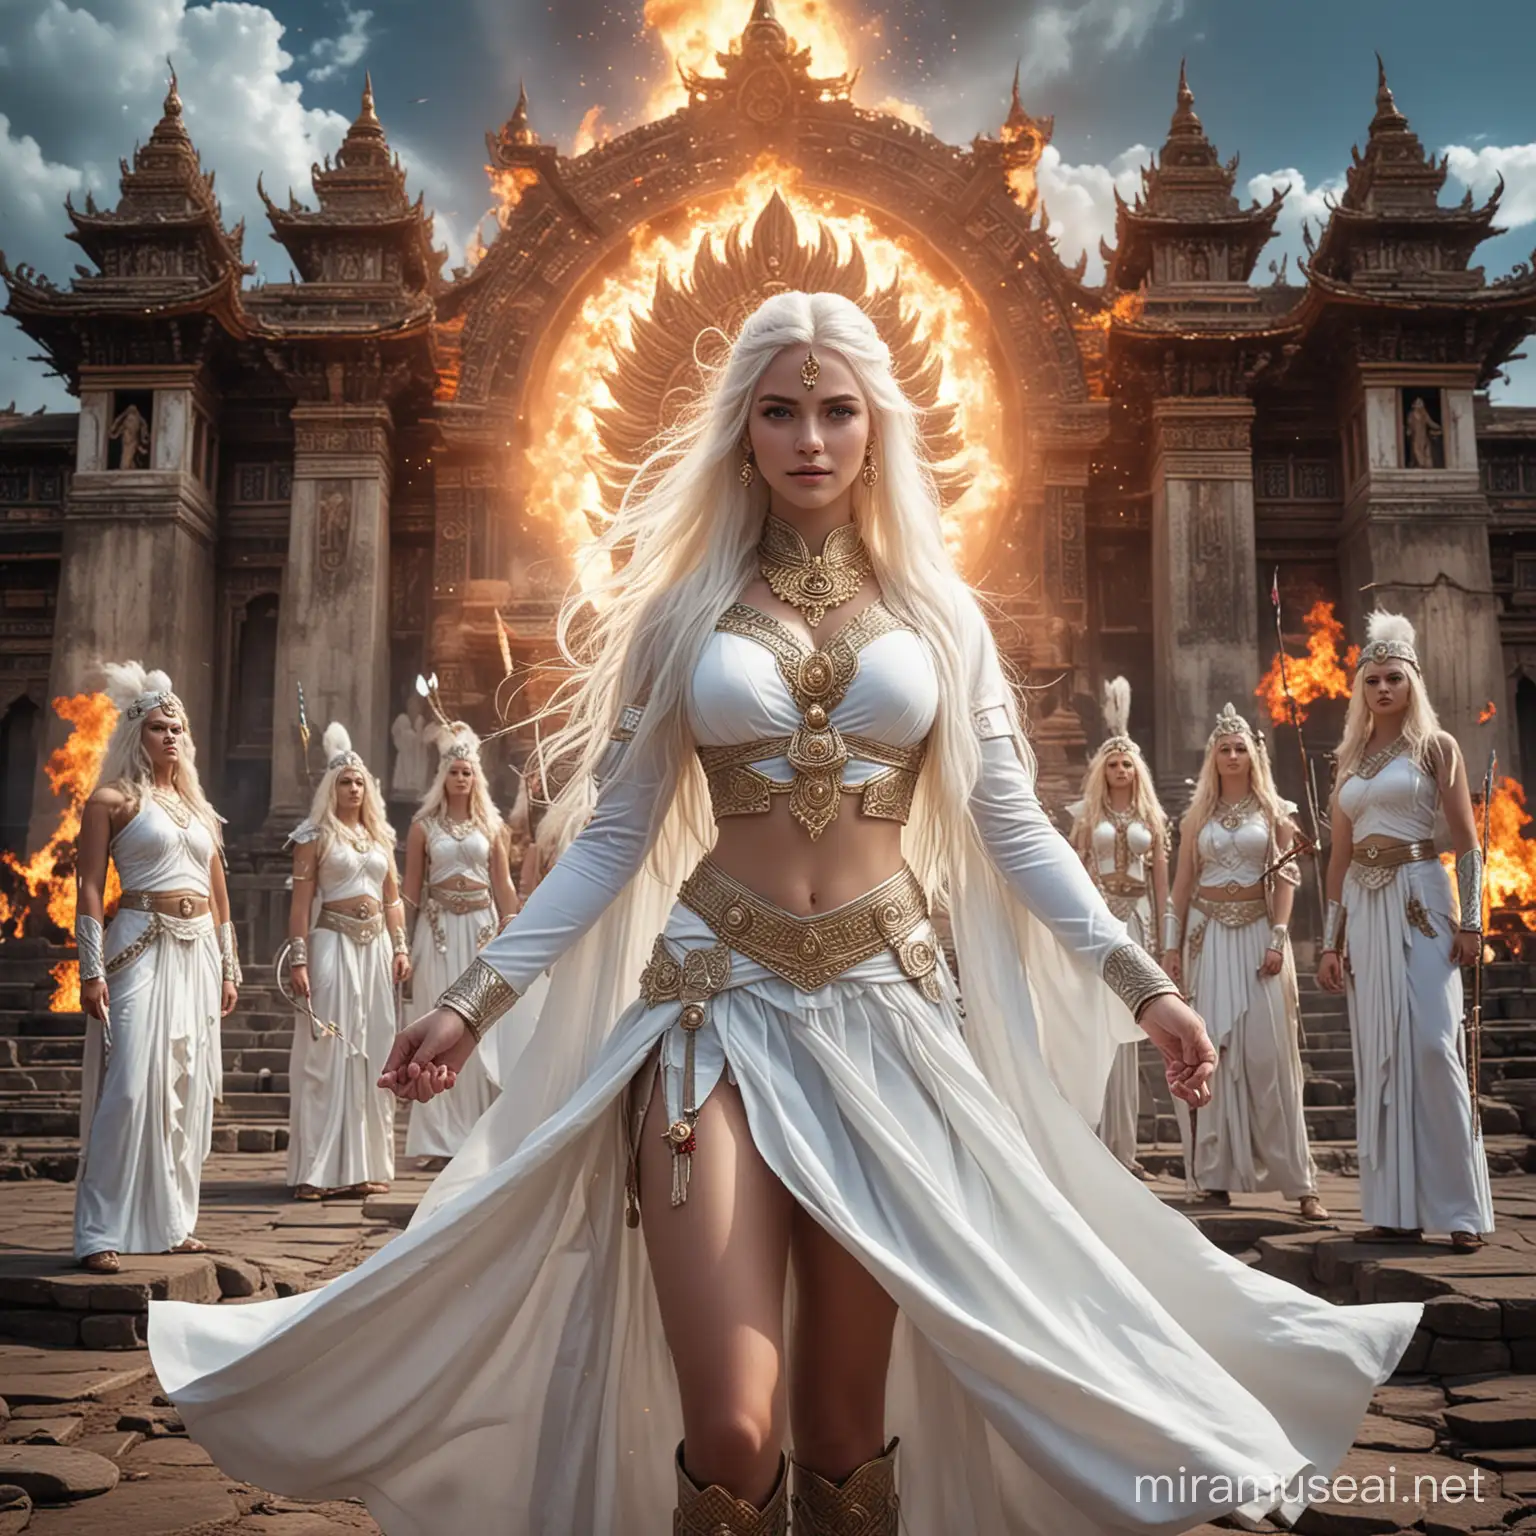 Empress Hindu Goddess Surrounded by Cosmic Power and Fire Circles